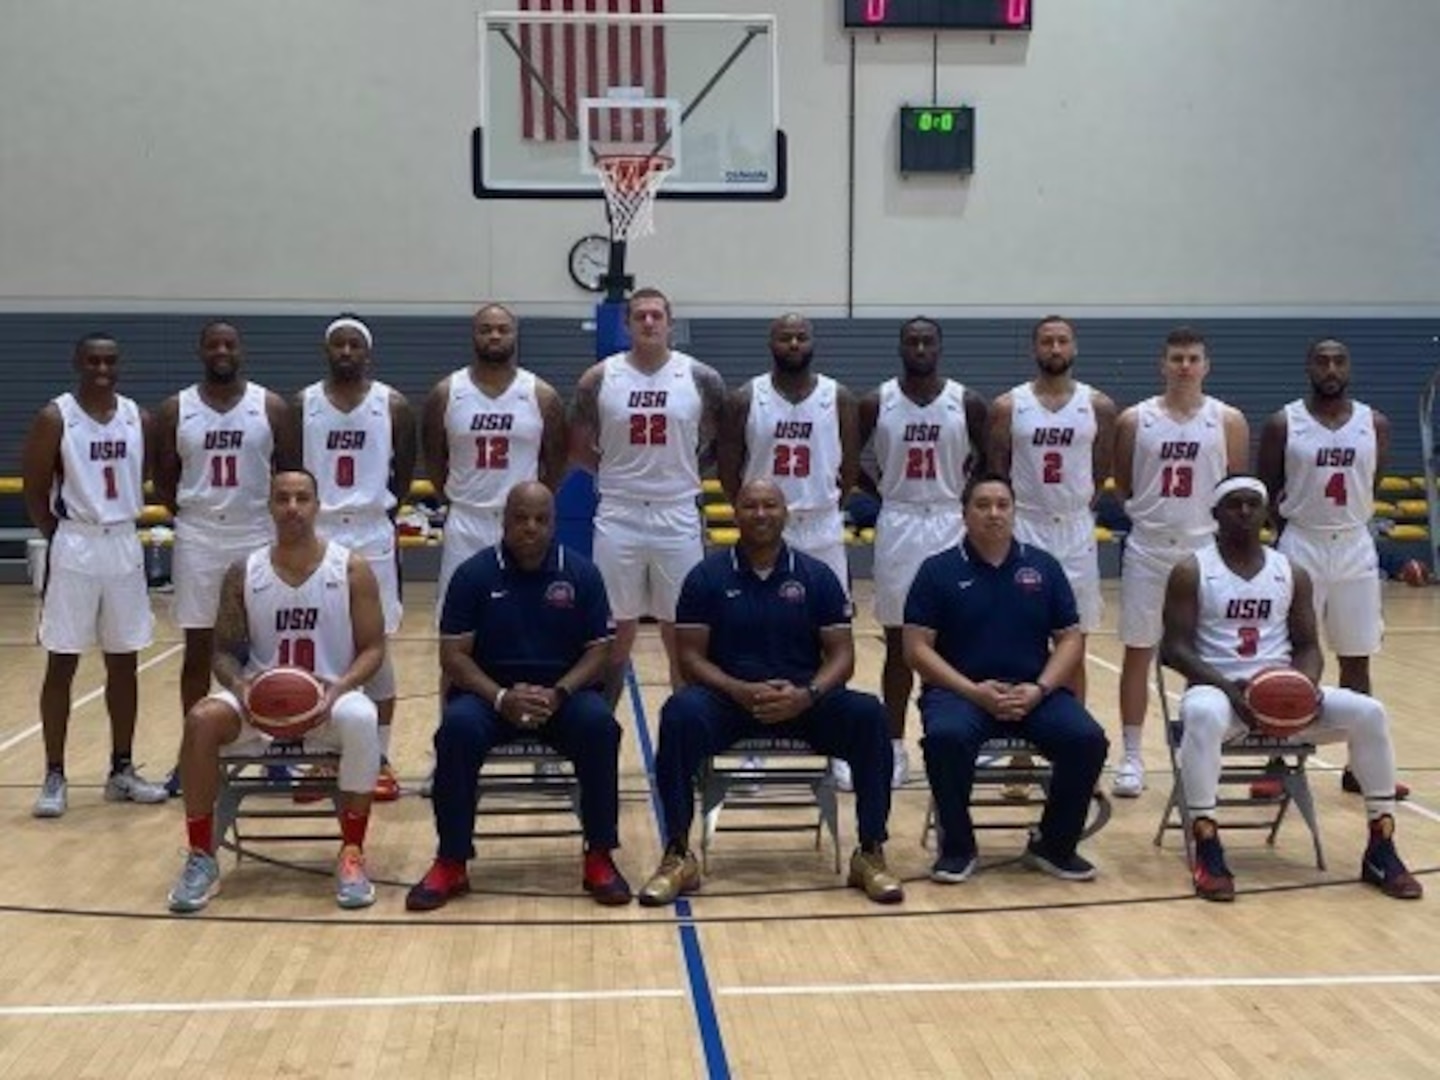 U.S. Coast Guard Cmdr. Micah Bonner, Director of Auxiliary Southern Region for the First Coast Guard District and head coach of the USA Armed Forces Men’s Basketball Team, poses with members of the team before playing in the Supreme Headquarters Allied Powers Europe (SHAPE) International Basketball Tournament (IBT) in Mons, Belgium, November 2021. The annual tournament brings teams from around the world together to a NATO installation for friendly competition and partnership. (U.S. Coast Guard courtesy photo)